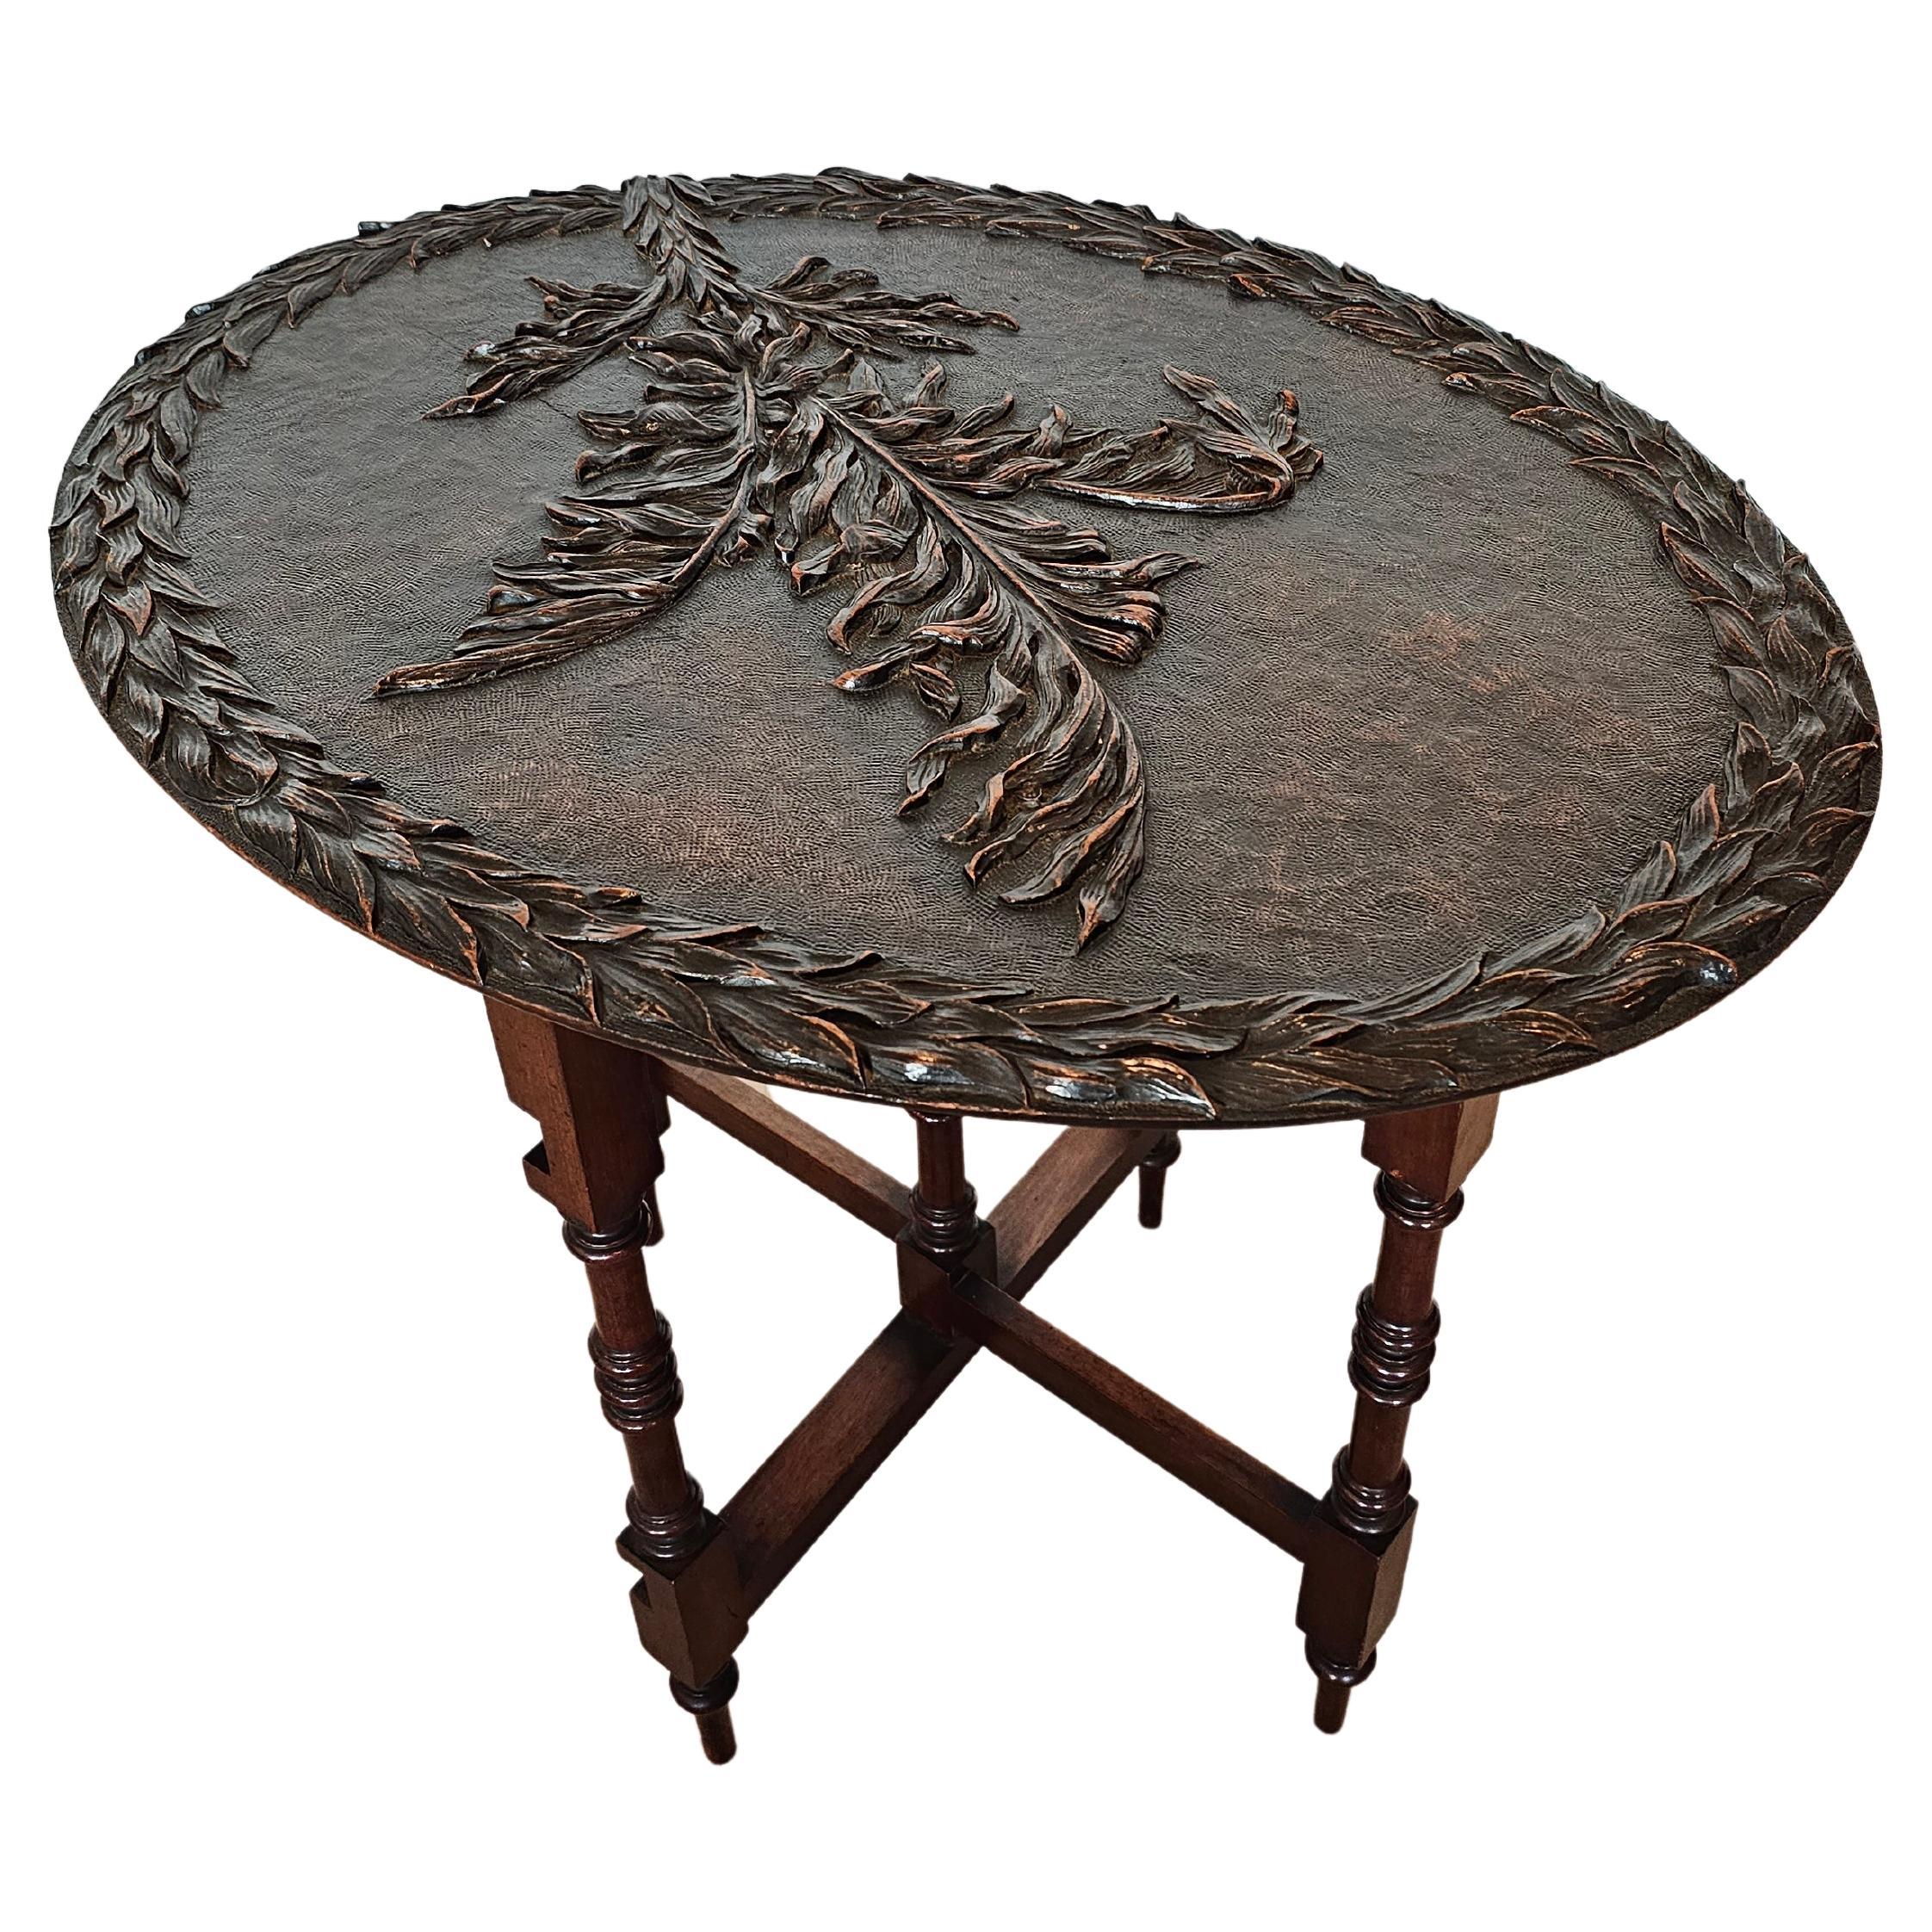 T. Simpson & Son English Victorian Relief Carved Mahogany Tilt-top Table For Sale